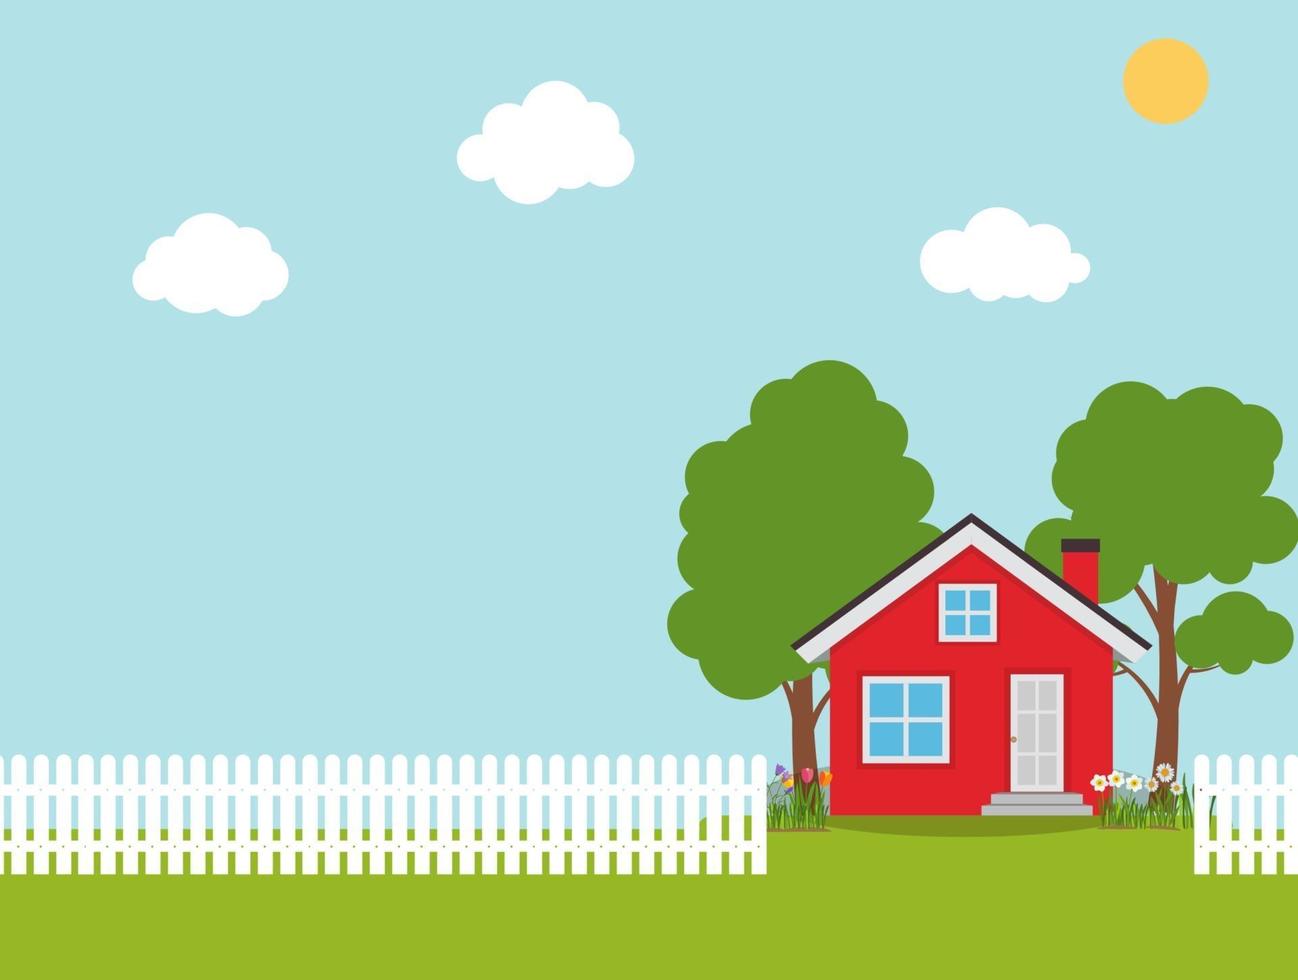 House with trees and flowers Flat Background vector